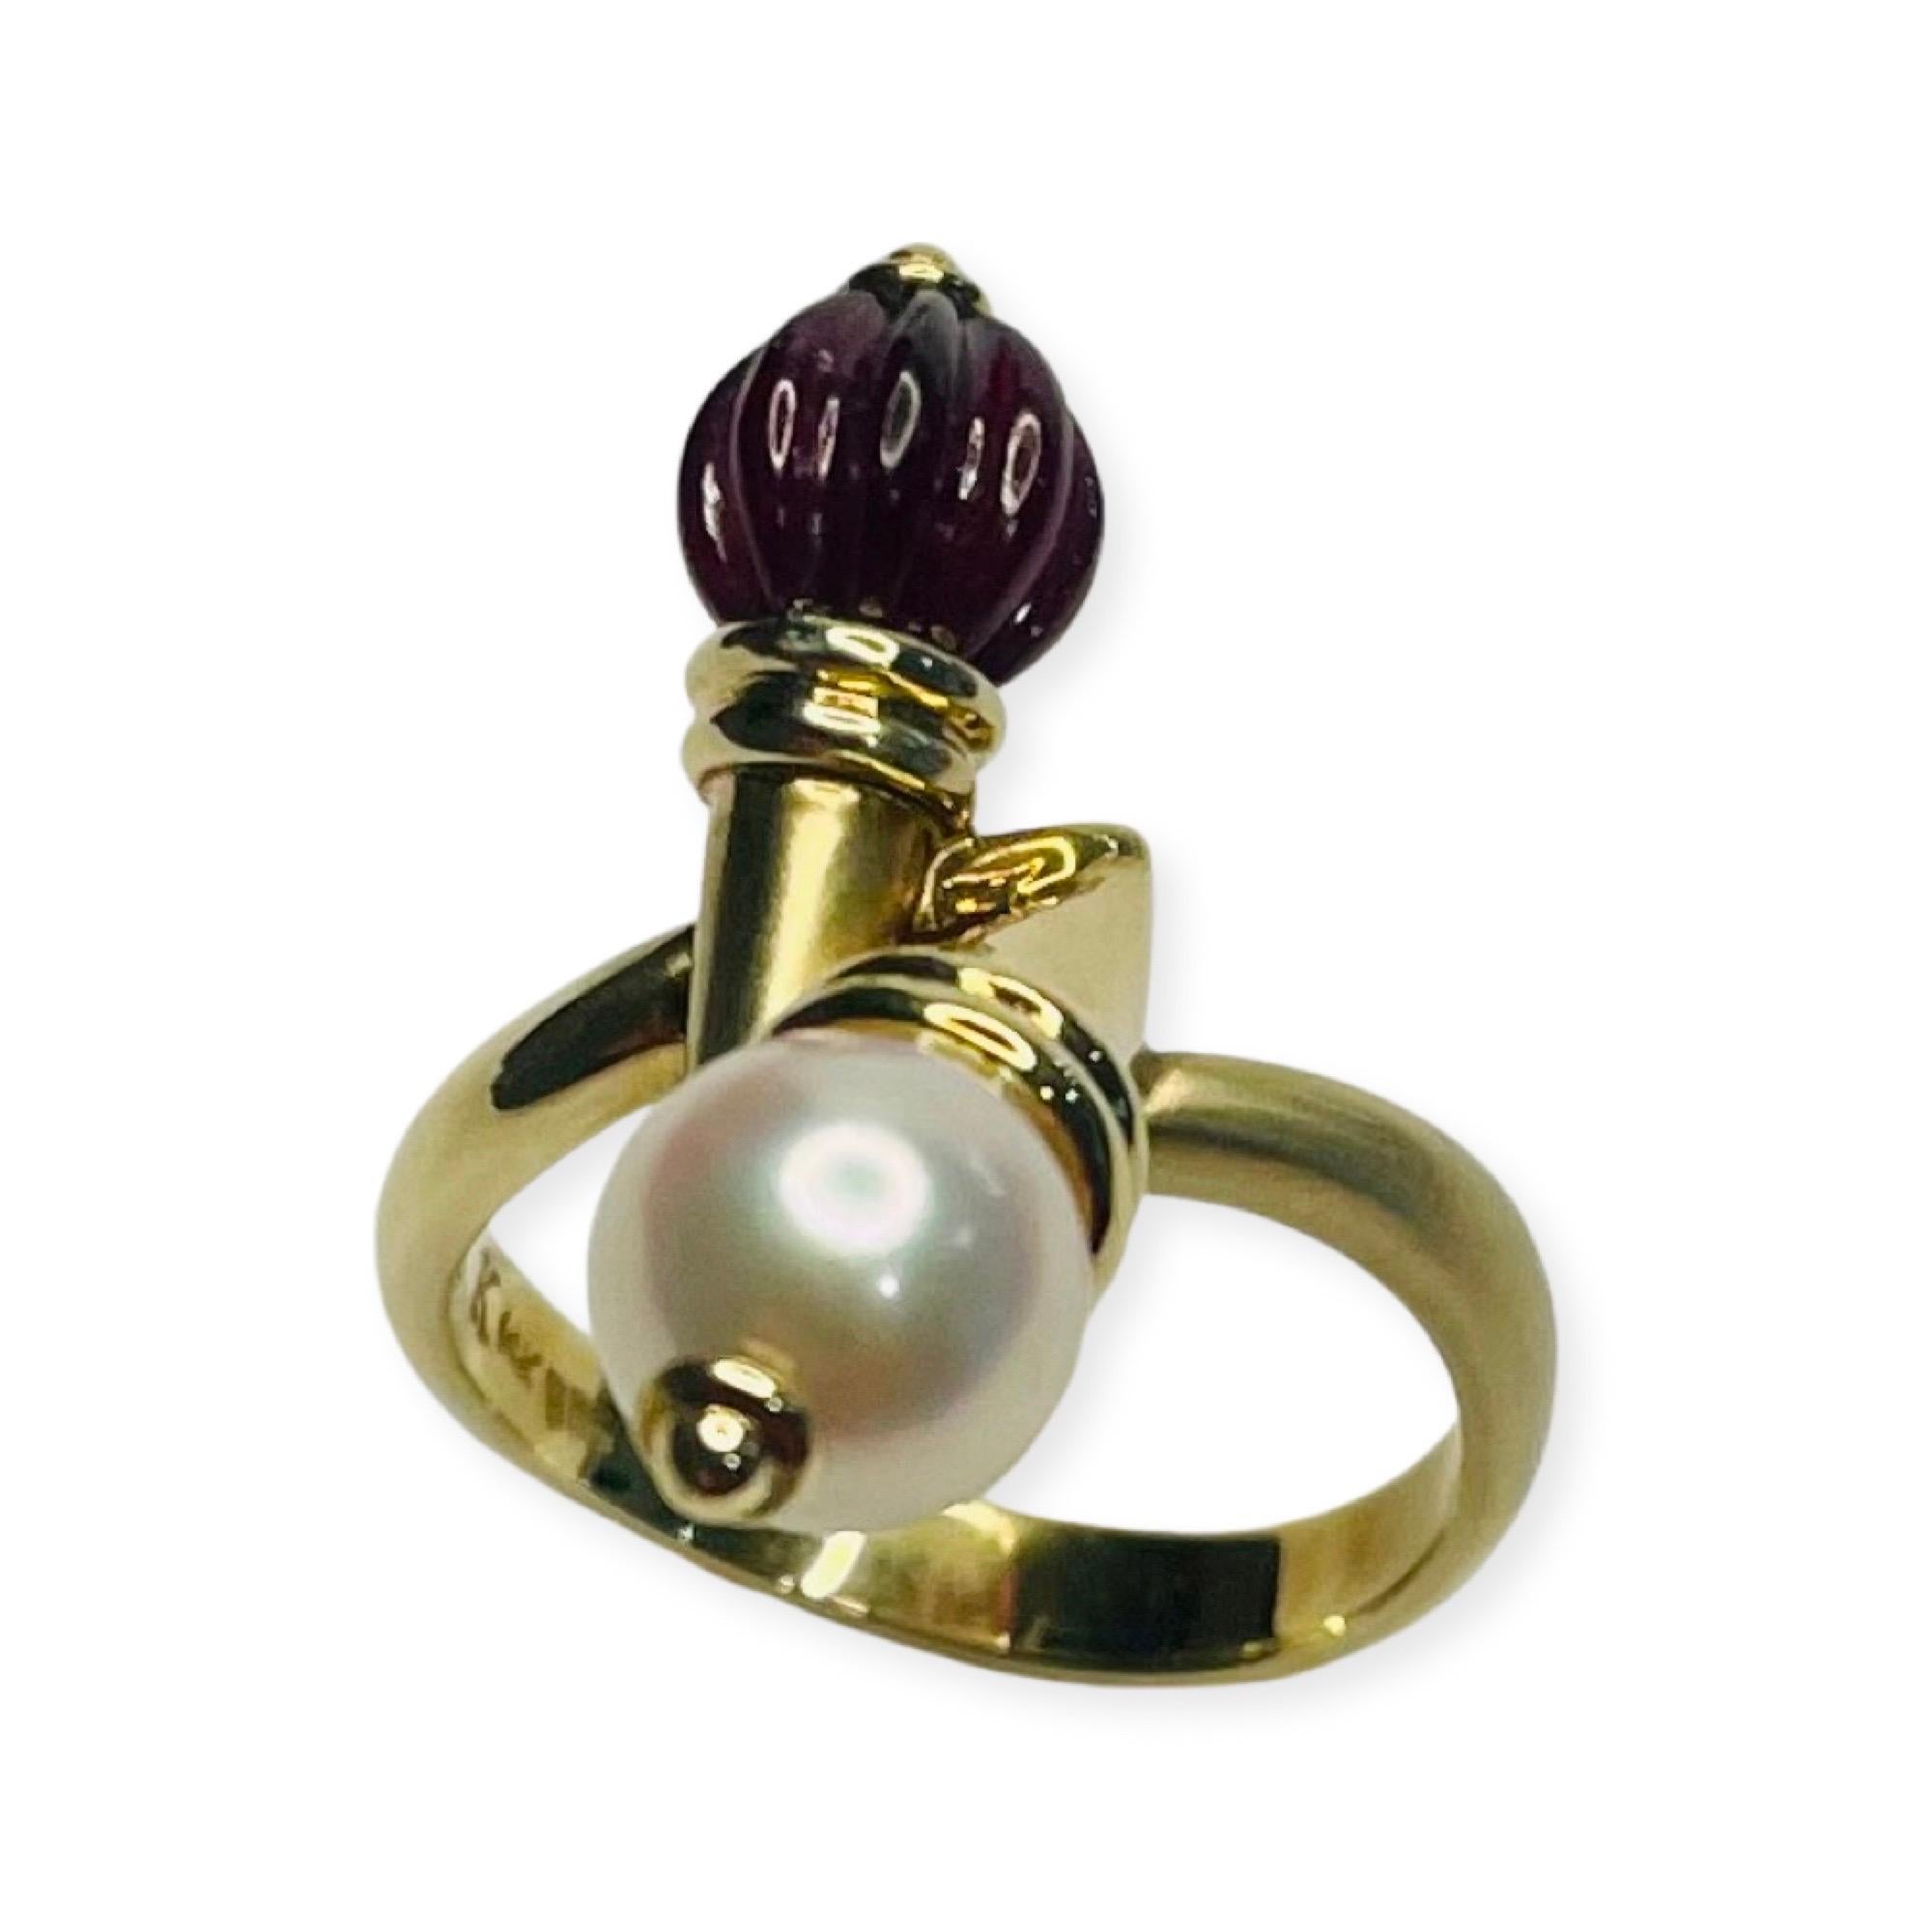 Kian 14K Yellow Gold Garnet and Cultured Japanese Akoya Pearl Ring. The garnet bead is 6.4 mm and the Japanese Akoya pearl is 7.3 mm. The pearl is round with high luster and slight blemishes. The shank is 3.2 mm at the top and tapers to 3.5 mm at